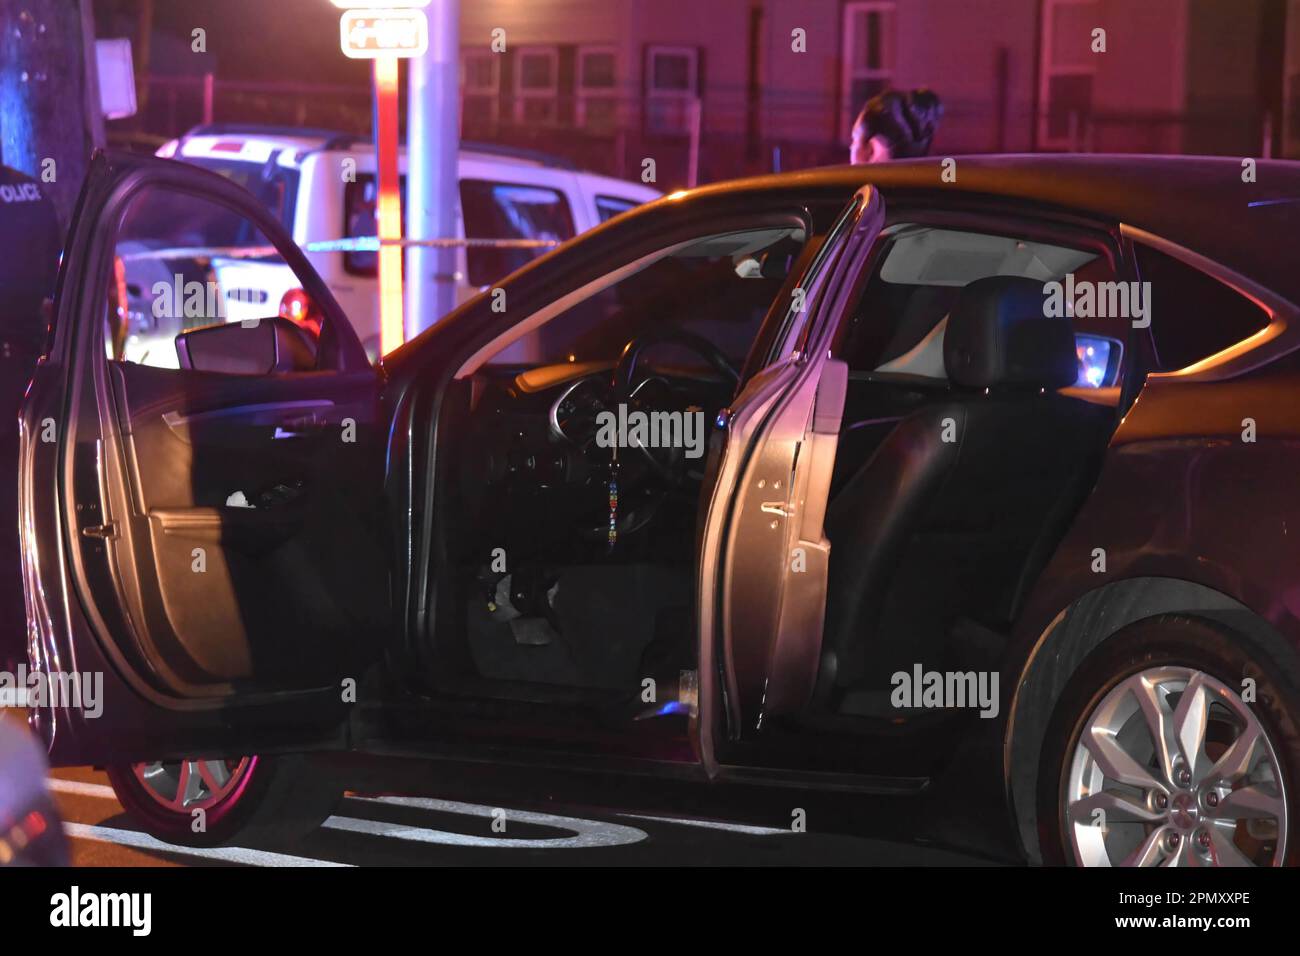 Paterson, USA. 15th Apr, 2023. Investigators gather near a vehicle in the area of East 22nd Street. Four people reported shot in a shooting in Paterson, New Jersey, United States in the early morning hours of Saturday, April 15, 2023. Reportedly, four people were shot early Saturday morning after 12:00 AM in Paterson, some of the victims were transported by EMS and some victims were transported by private vehicles. No further information was immediately available from the Paterson police department. There are several crime scenes. One crime scene in the area of East 22nd Street had a Stock Photo